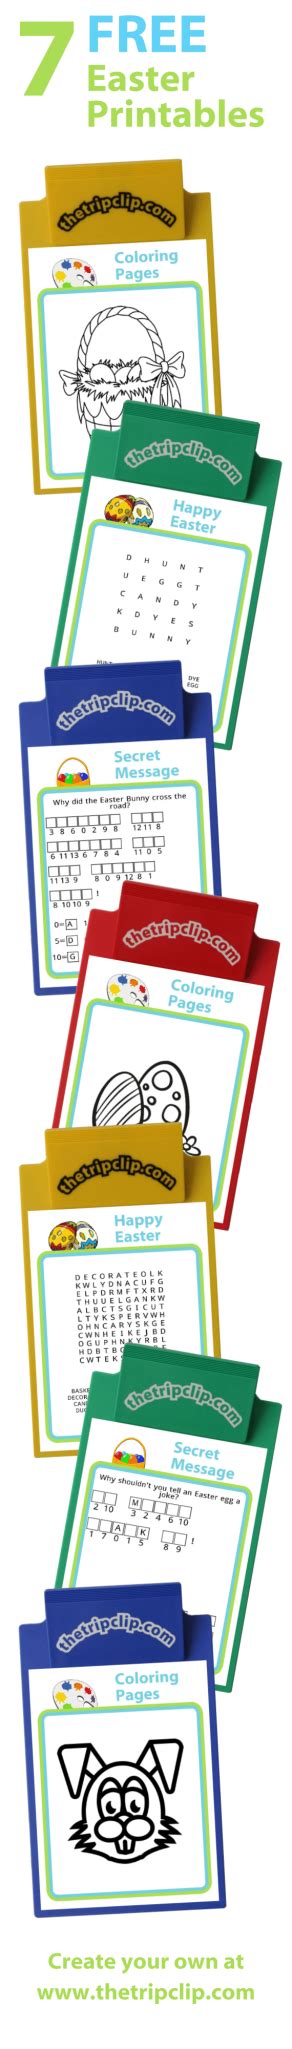 Free Printables Easter Activities The Trip Clip Blog Make Any List